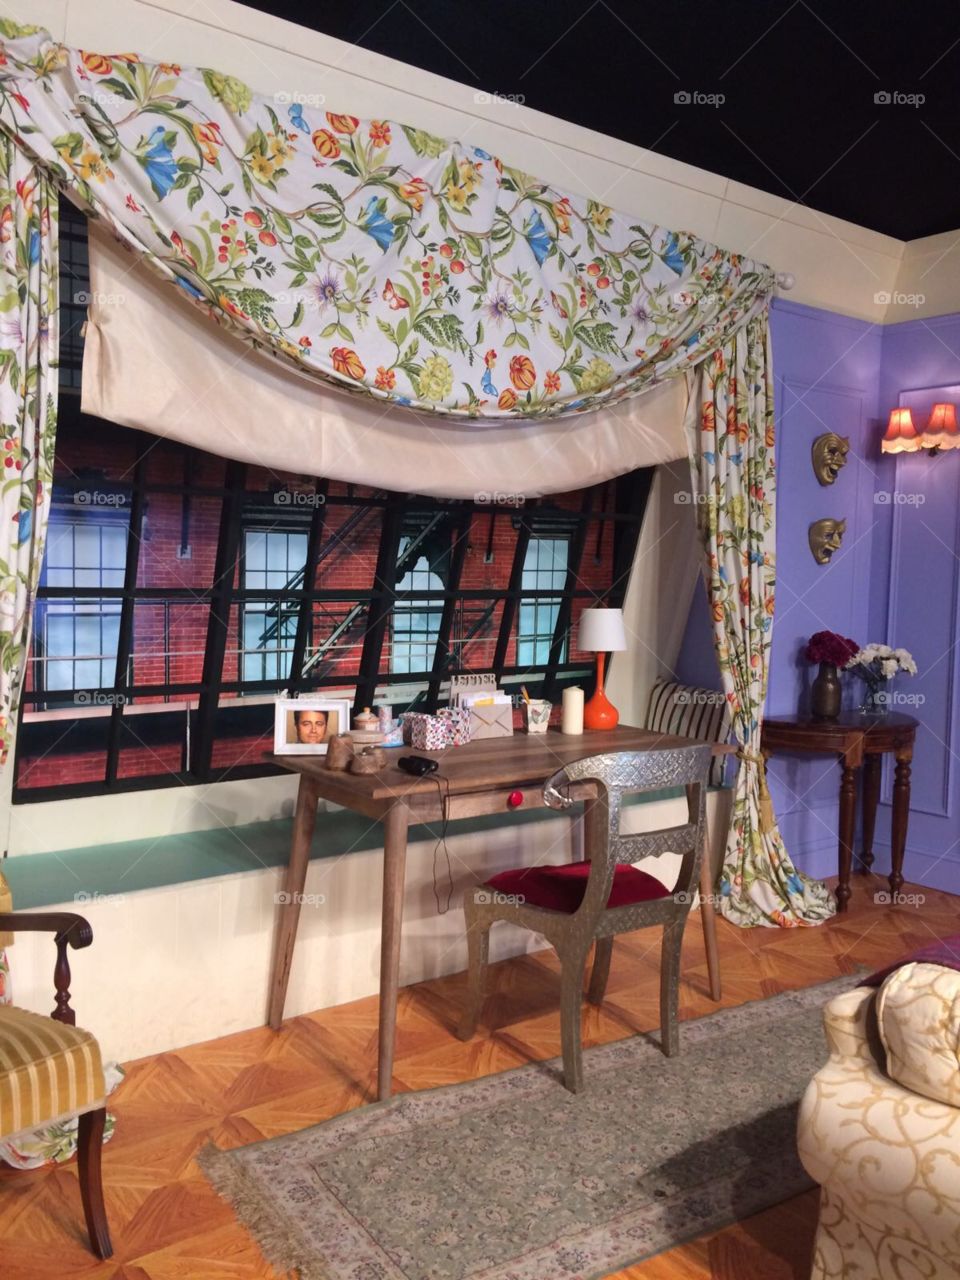 Picture of the set from tv show friends of Monica’s apartment 